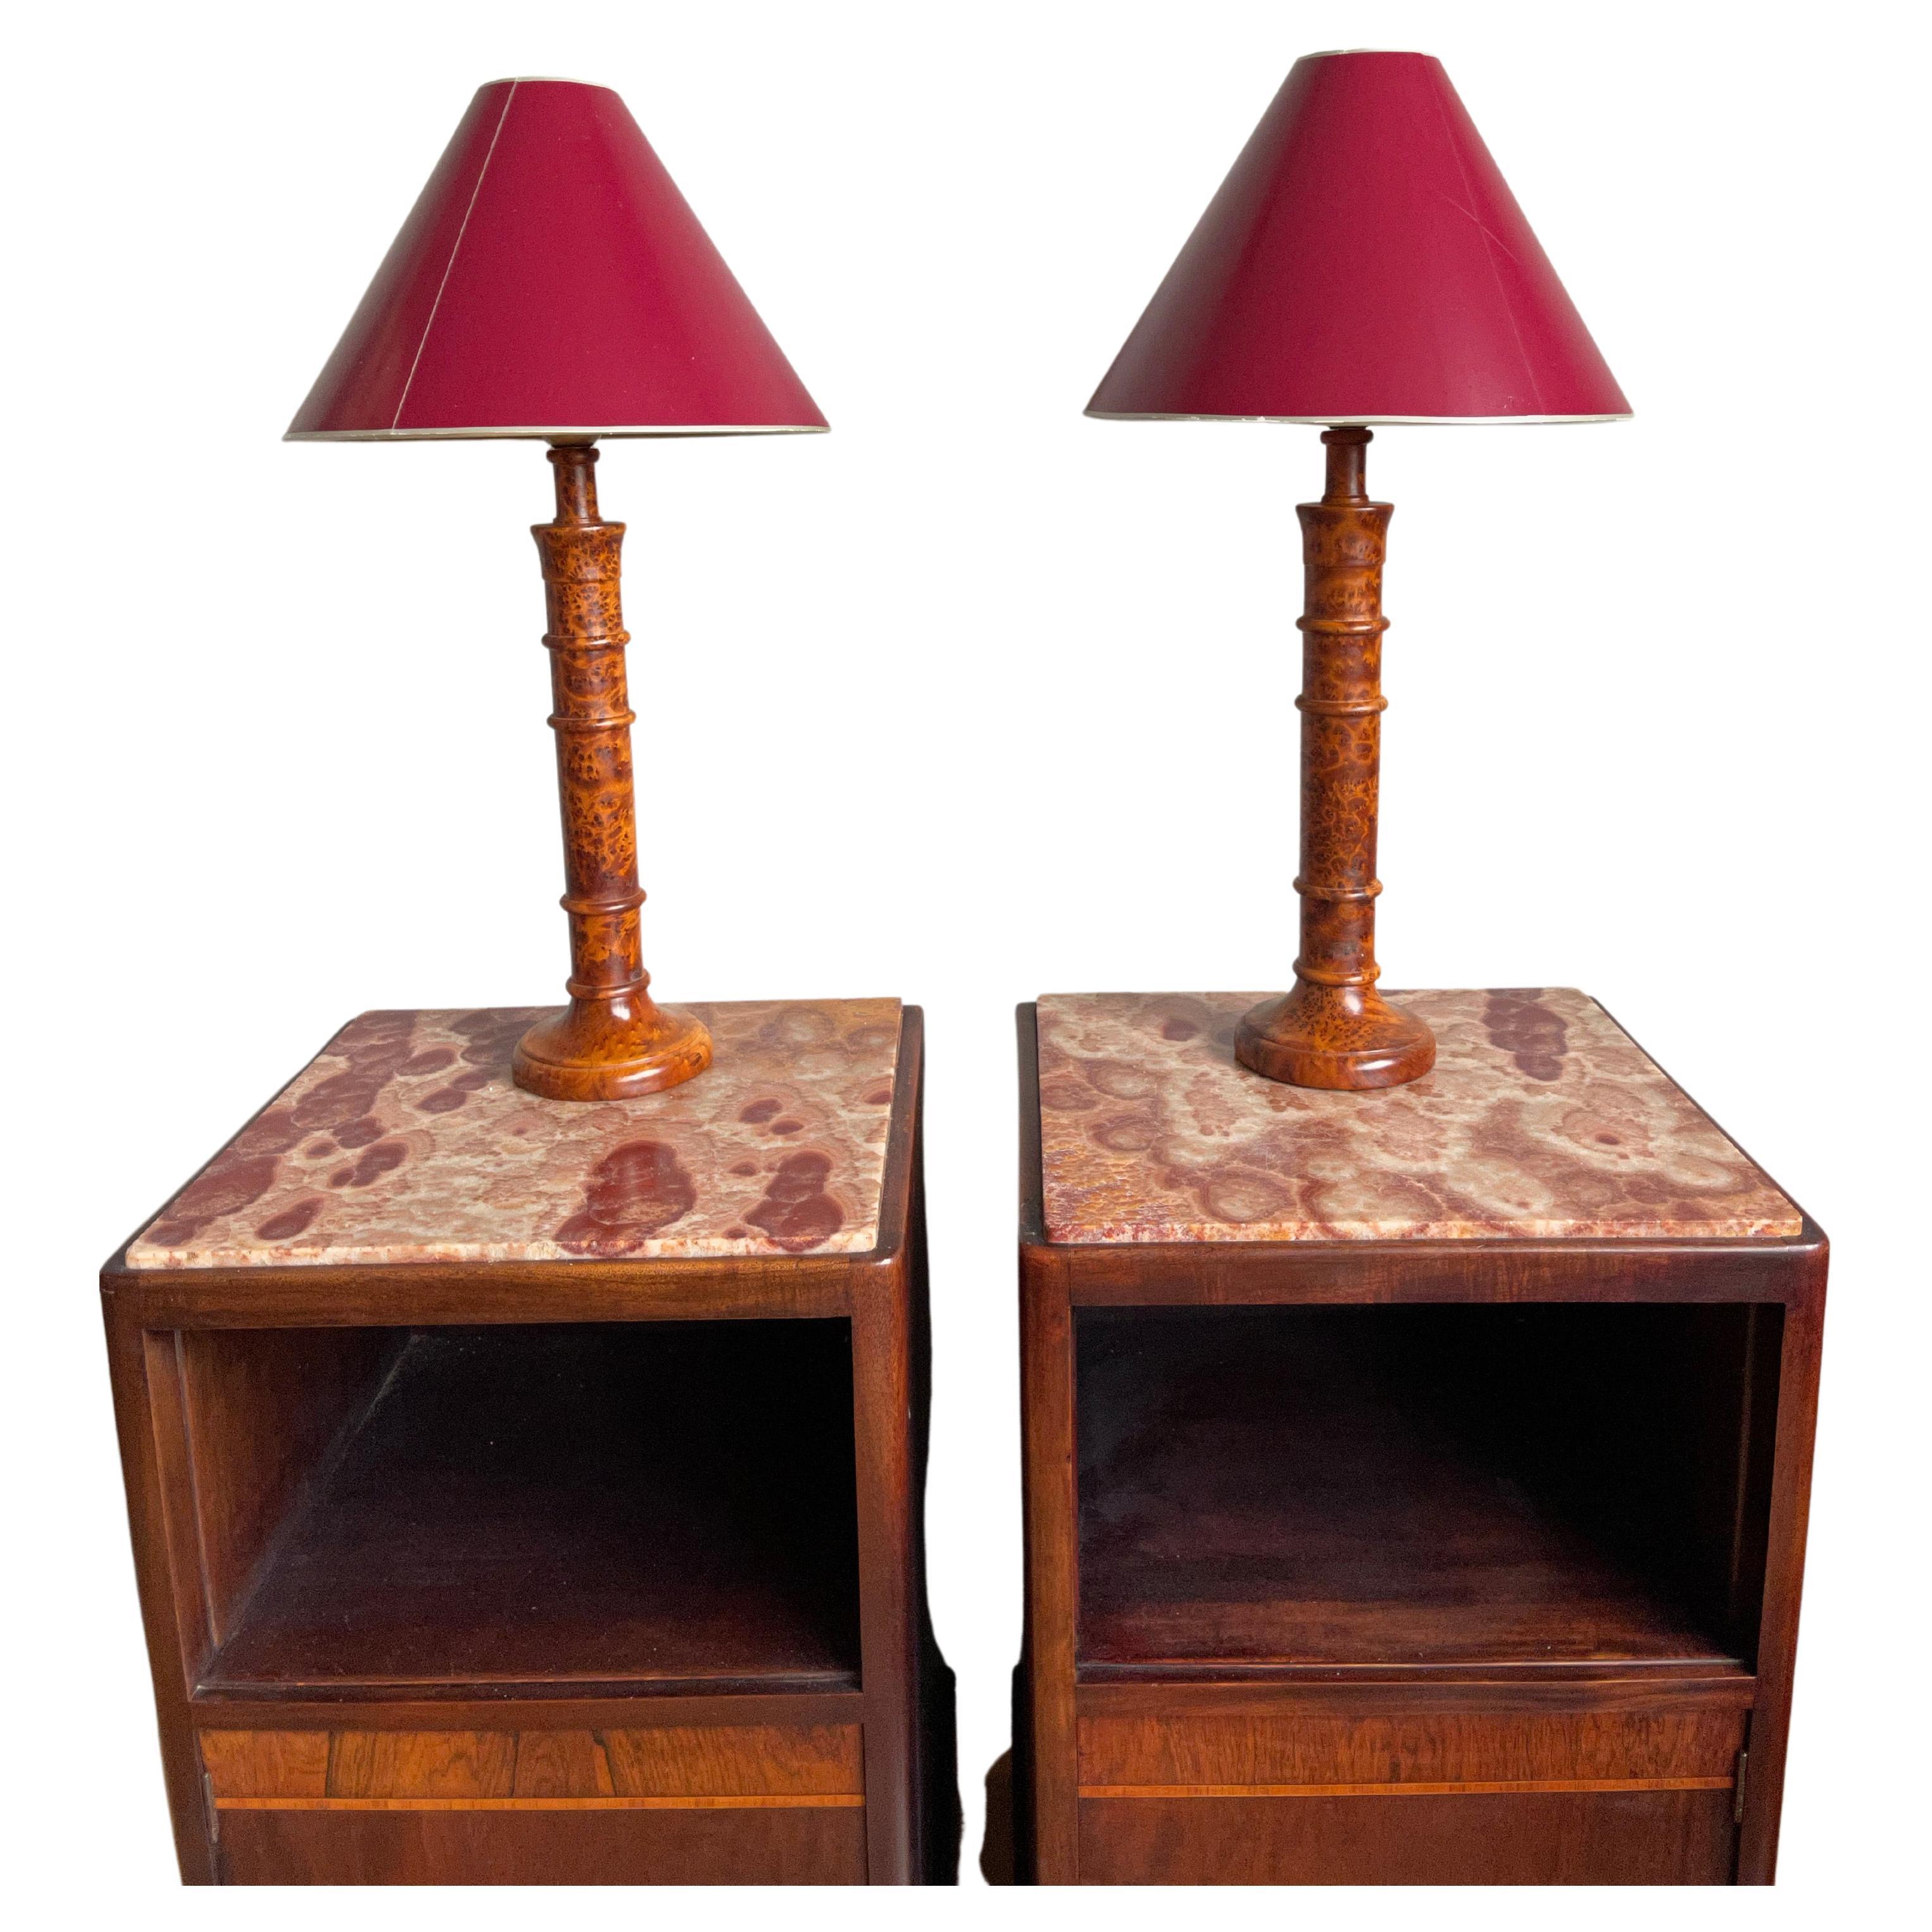 Stunning Pair of Solid Burl / Burr Wood Table Lamps Pair of Stylish Turned Lamps